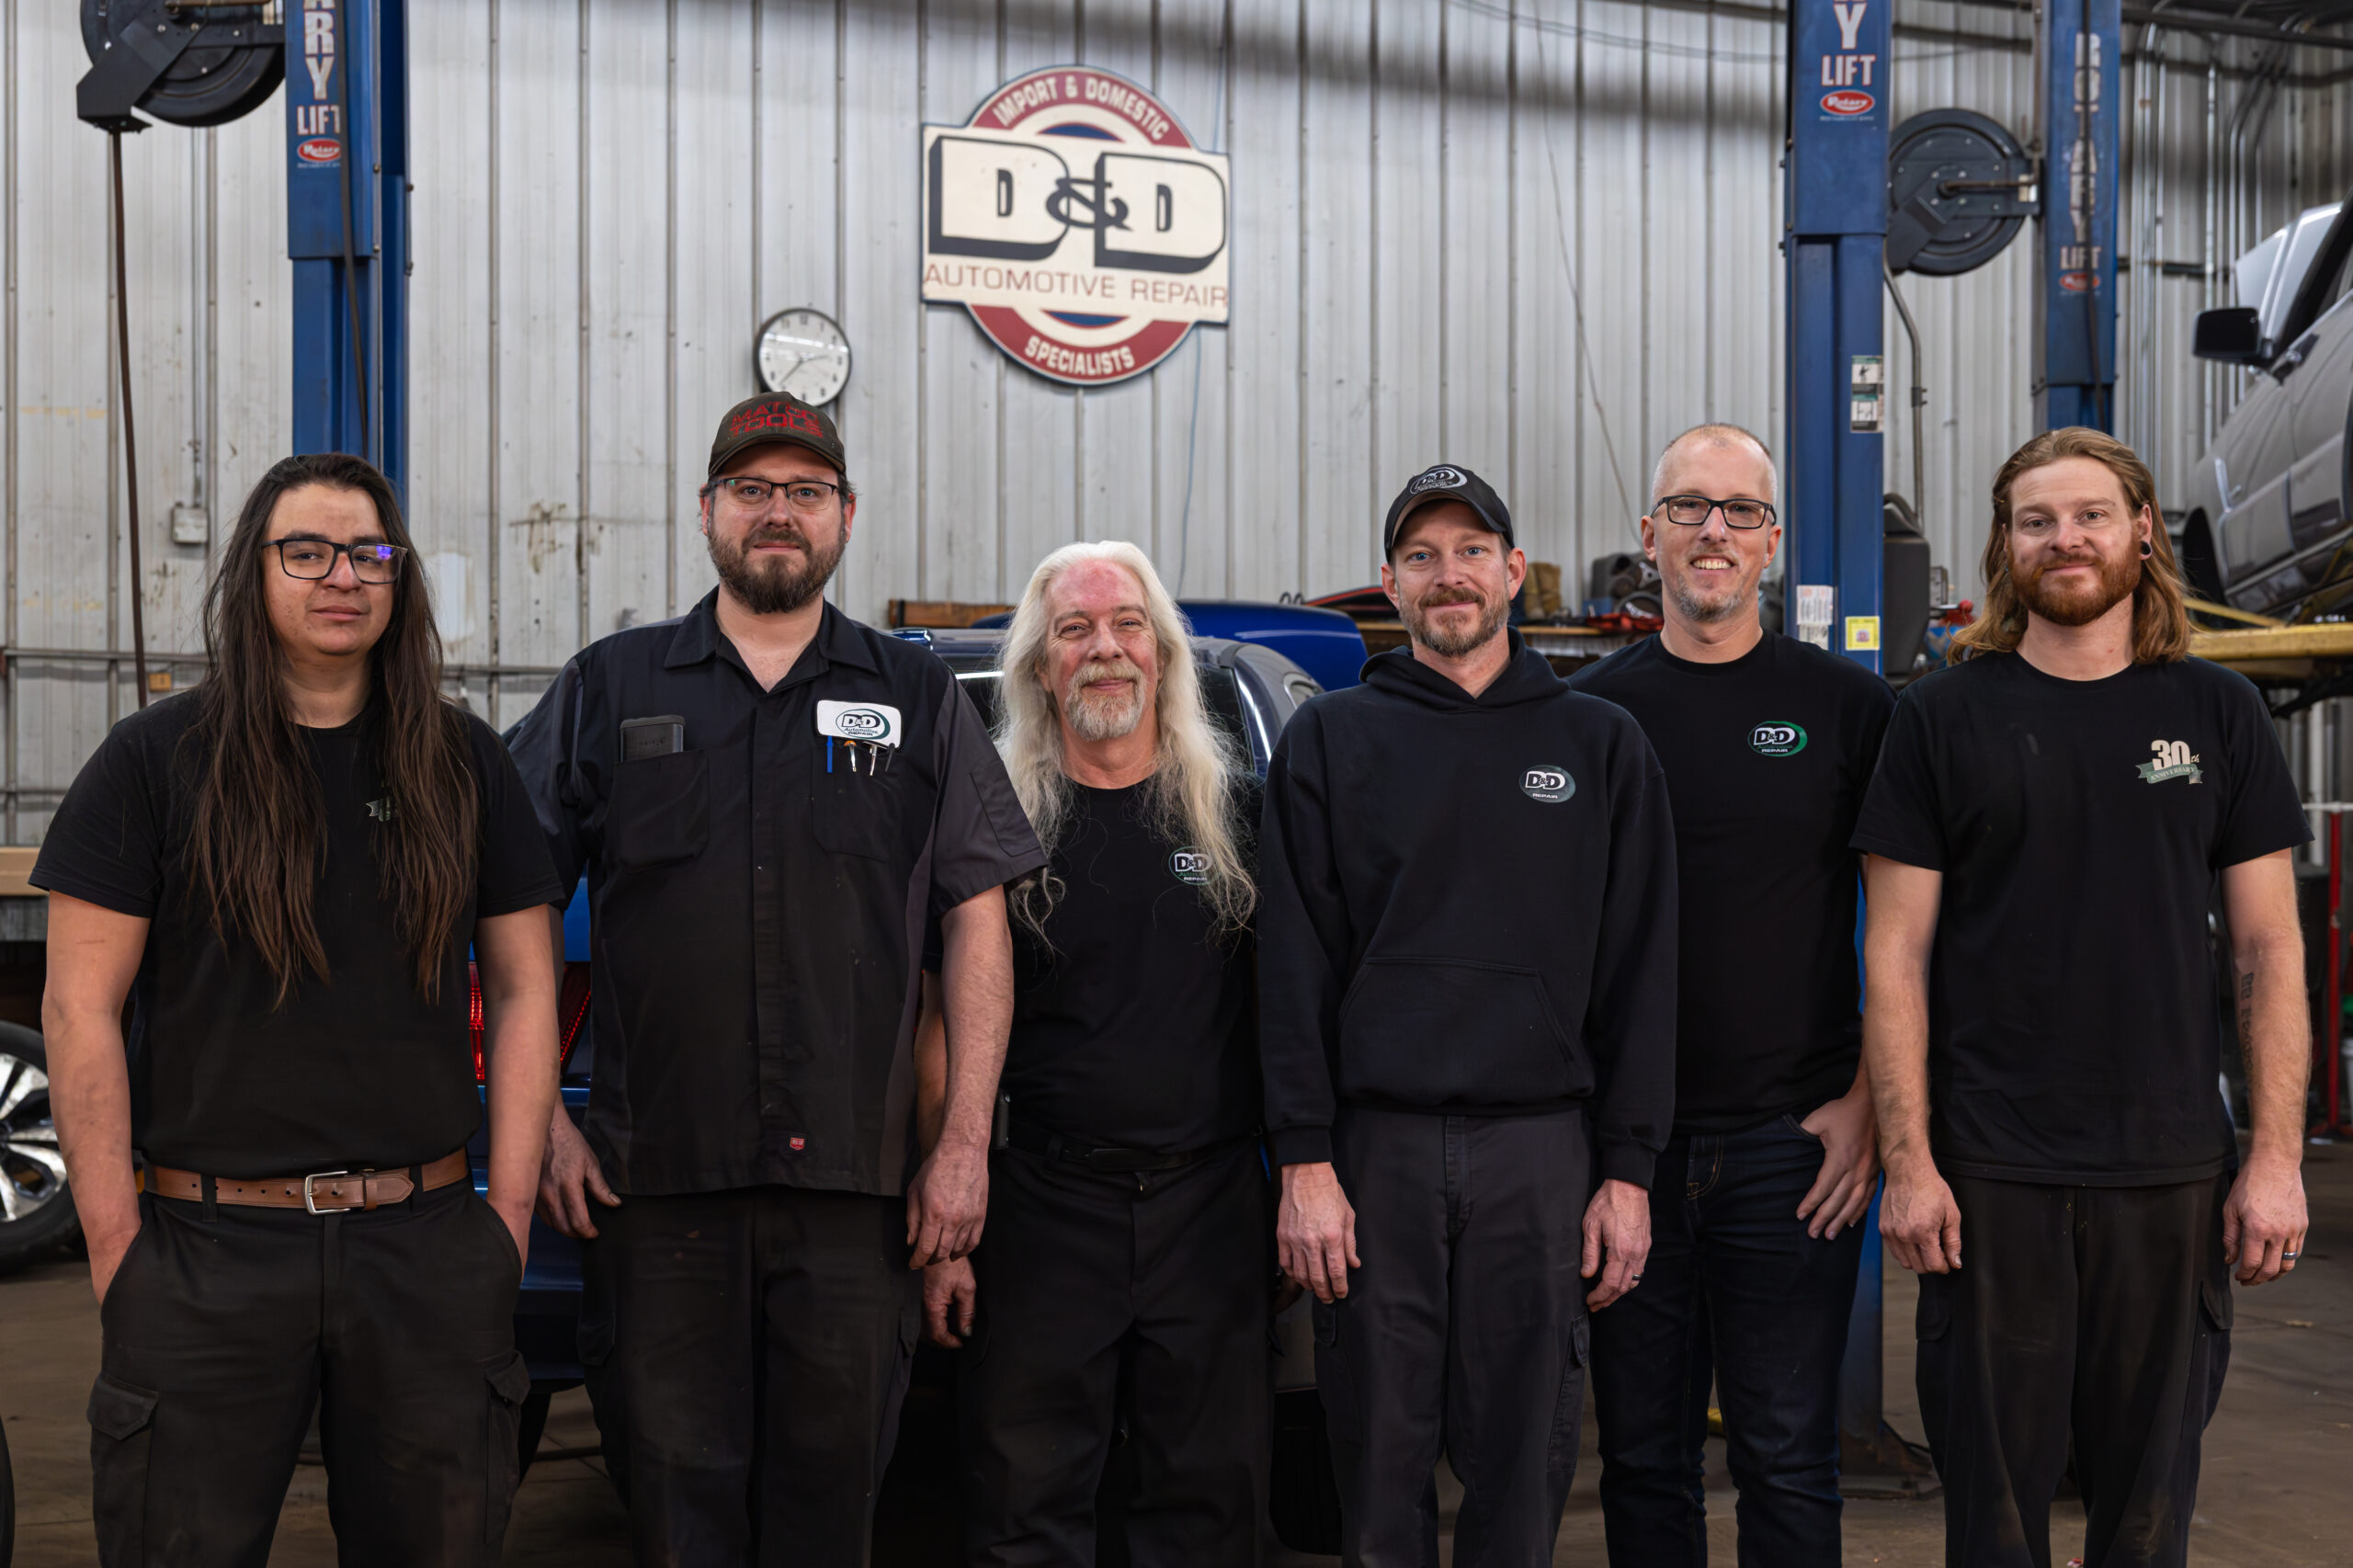 D&D Automotive Repair family picture in Waukesha, WI